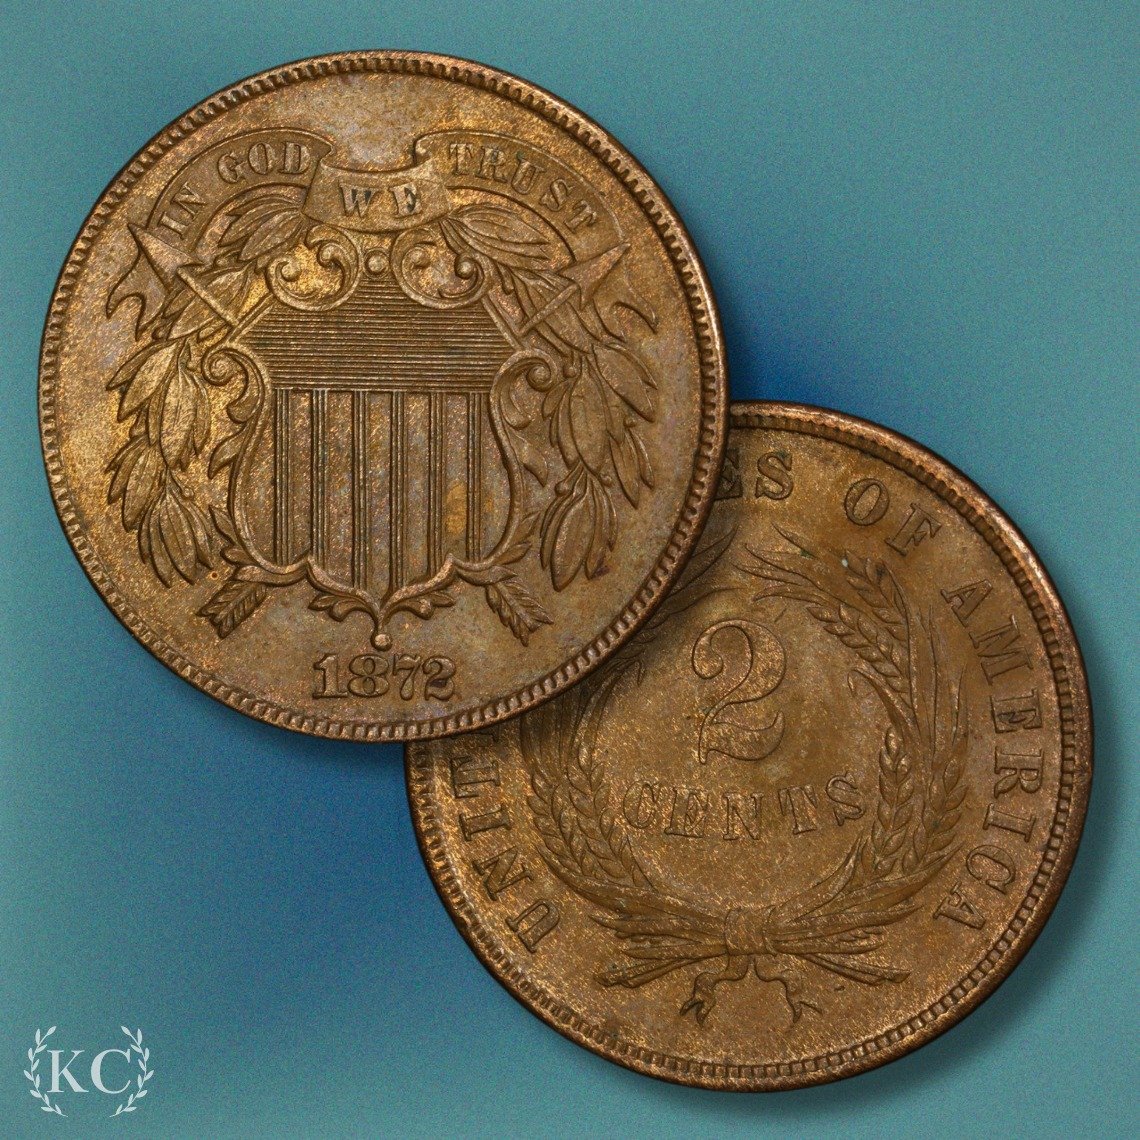 This PCGS Proof 58 Two Cent Piece: Rare and recently rehomed! Don't miss out on rarities waiting for you aton our 3bay. Hundreds of items added weekly!✨

#Coins #PCGS #CoinCollecting